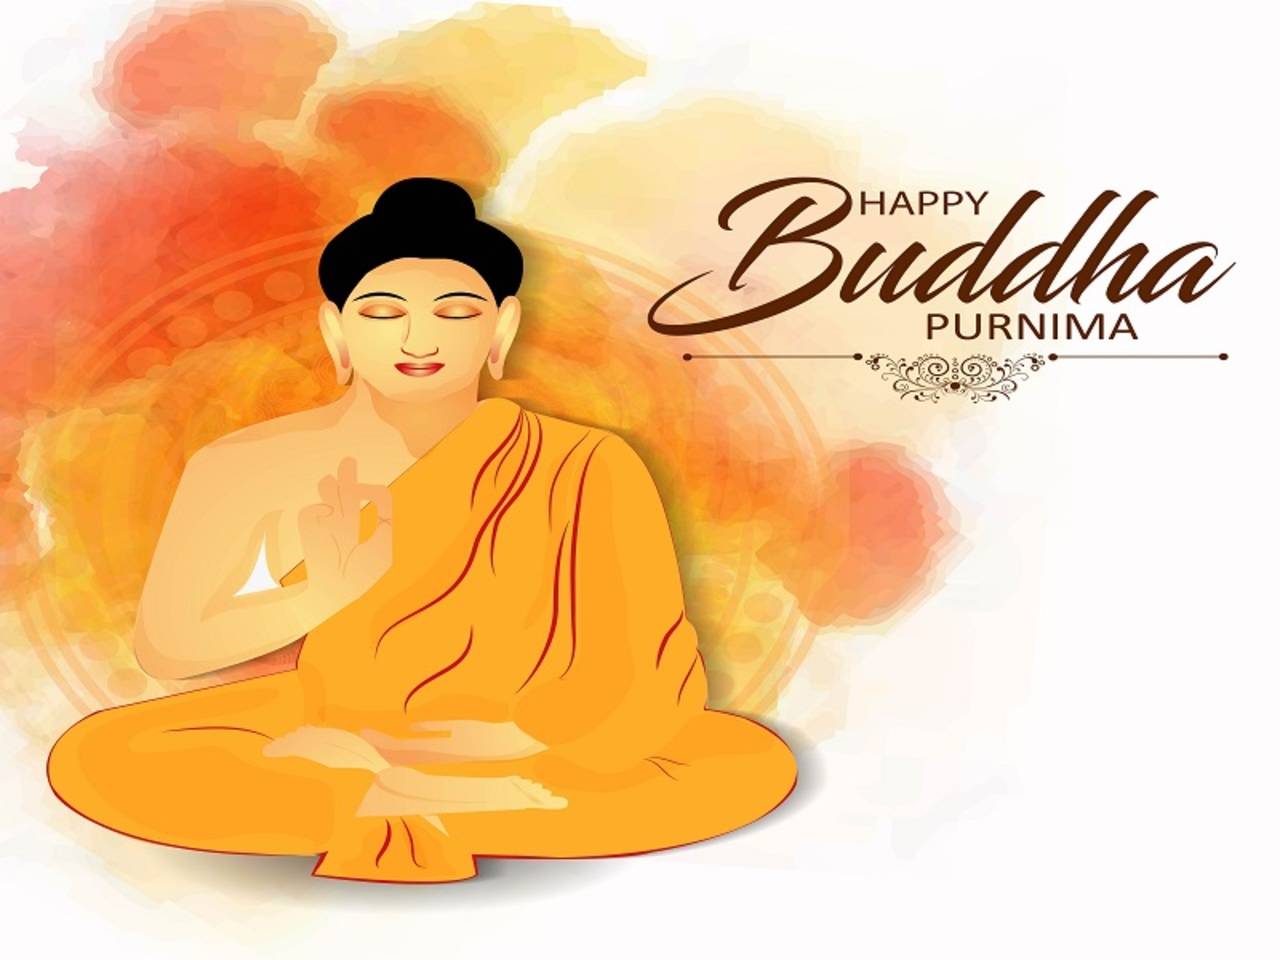 Happy Buddha Purnima 2020: Inspirational Quotes, Wishes, Messages &  Whatsapp Status | - Times Of India